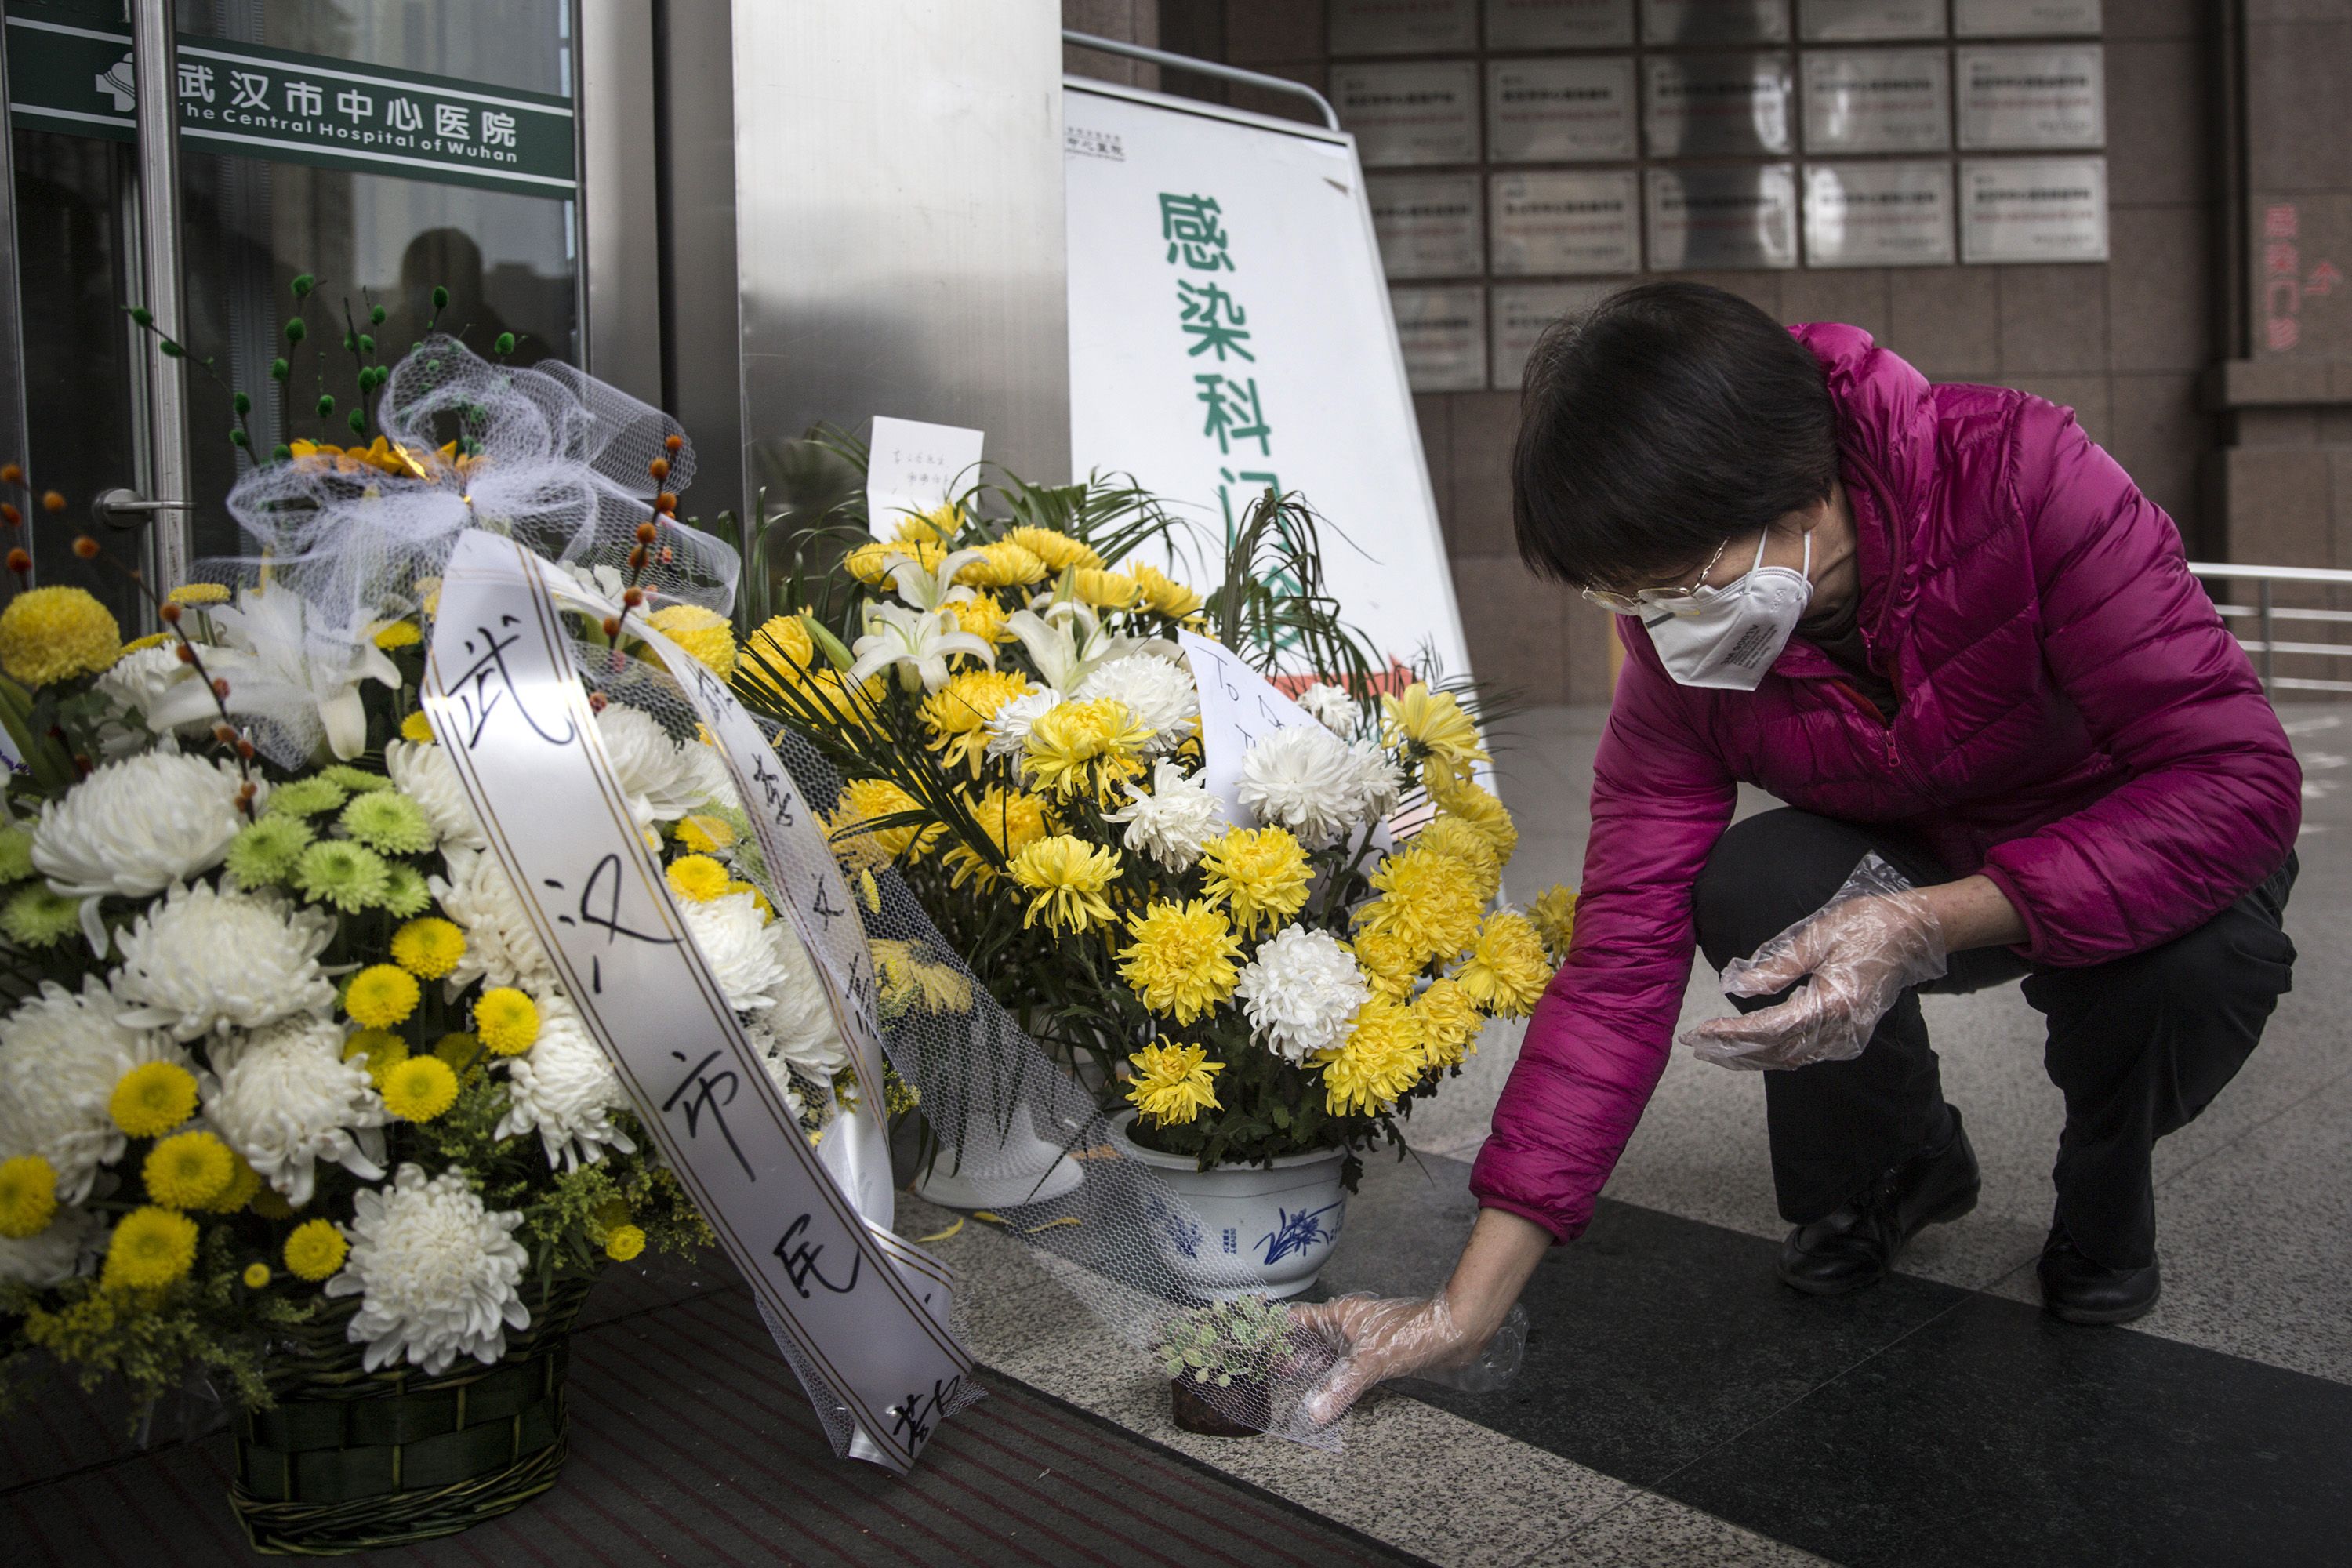 In this image, a person holds a bag while looking at the flowers outside the Wuhan hospital 